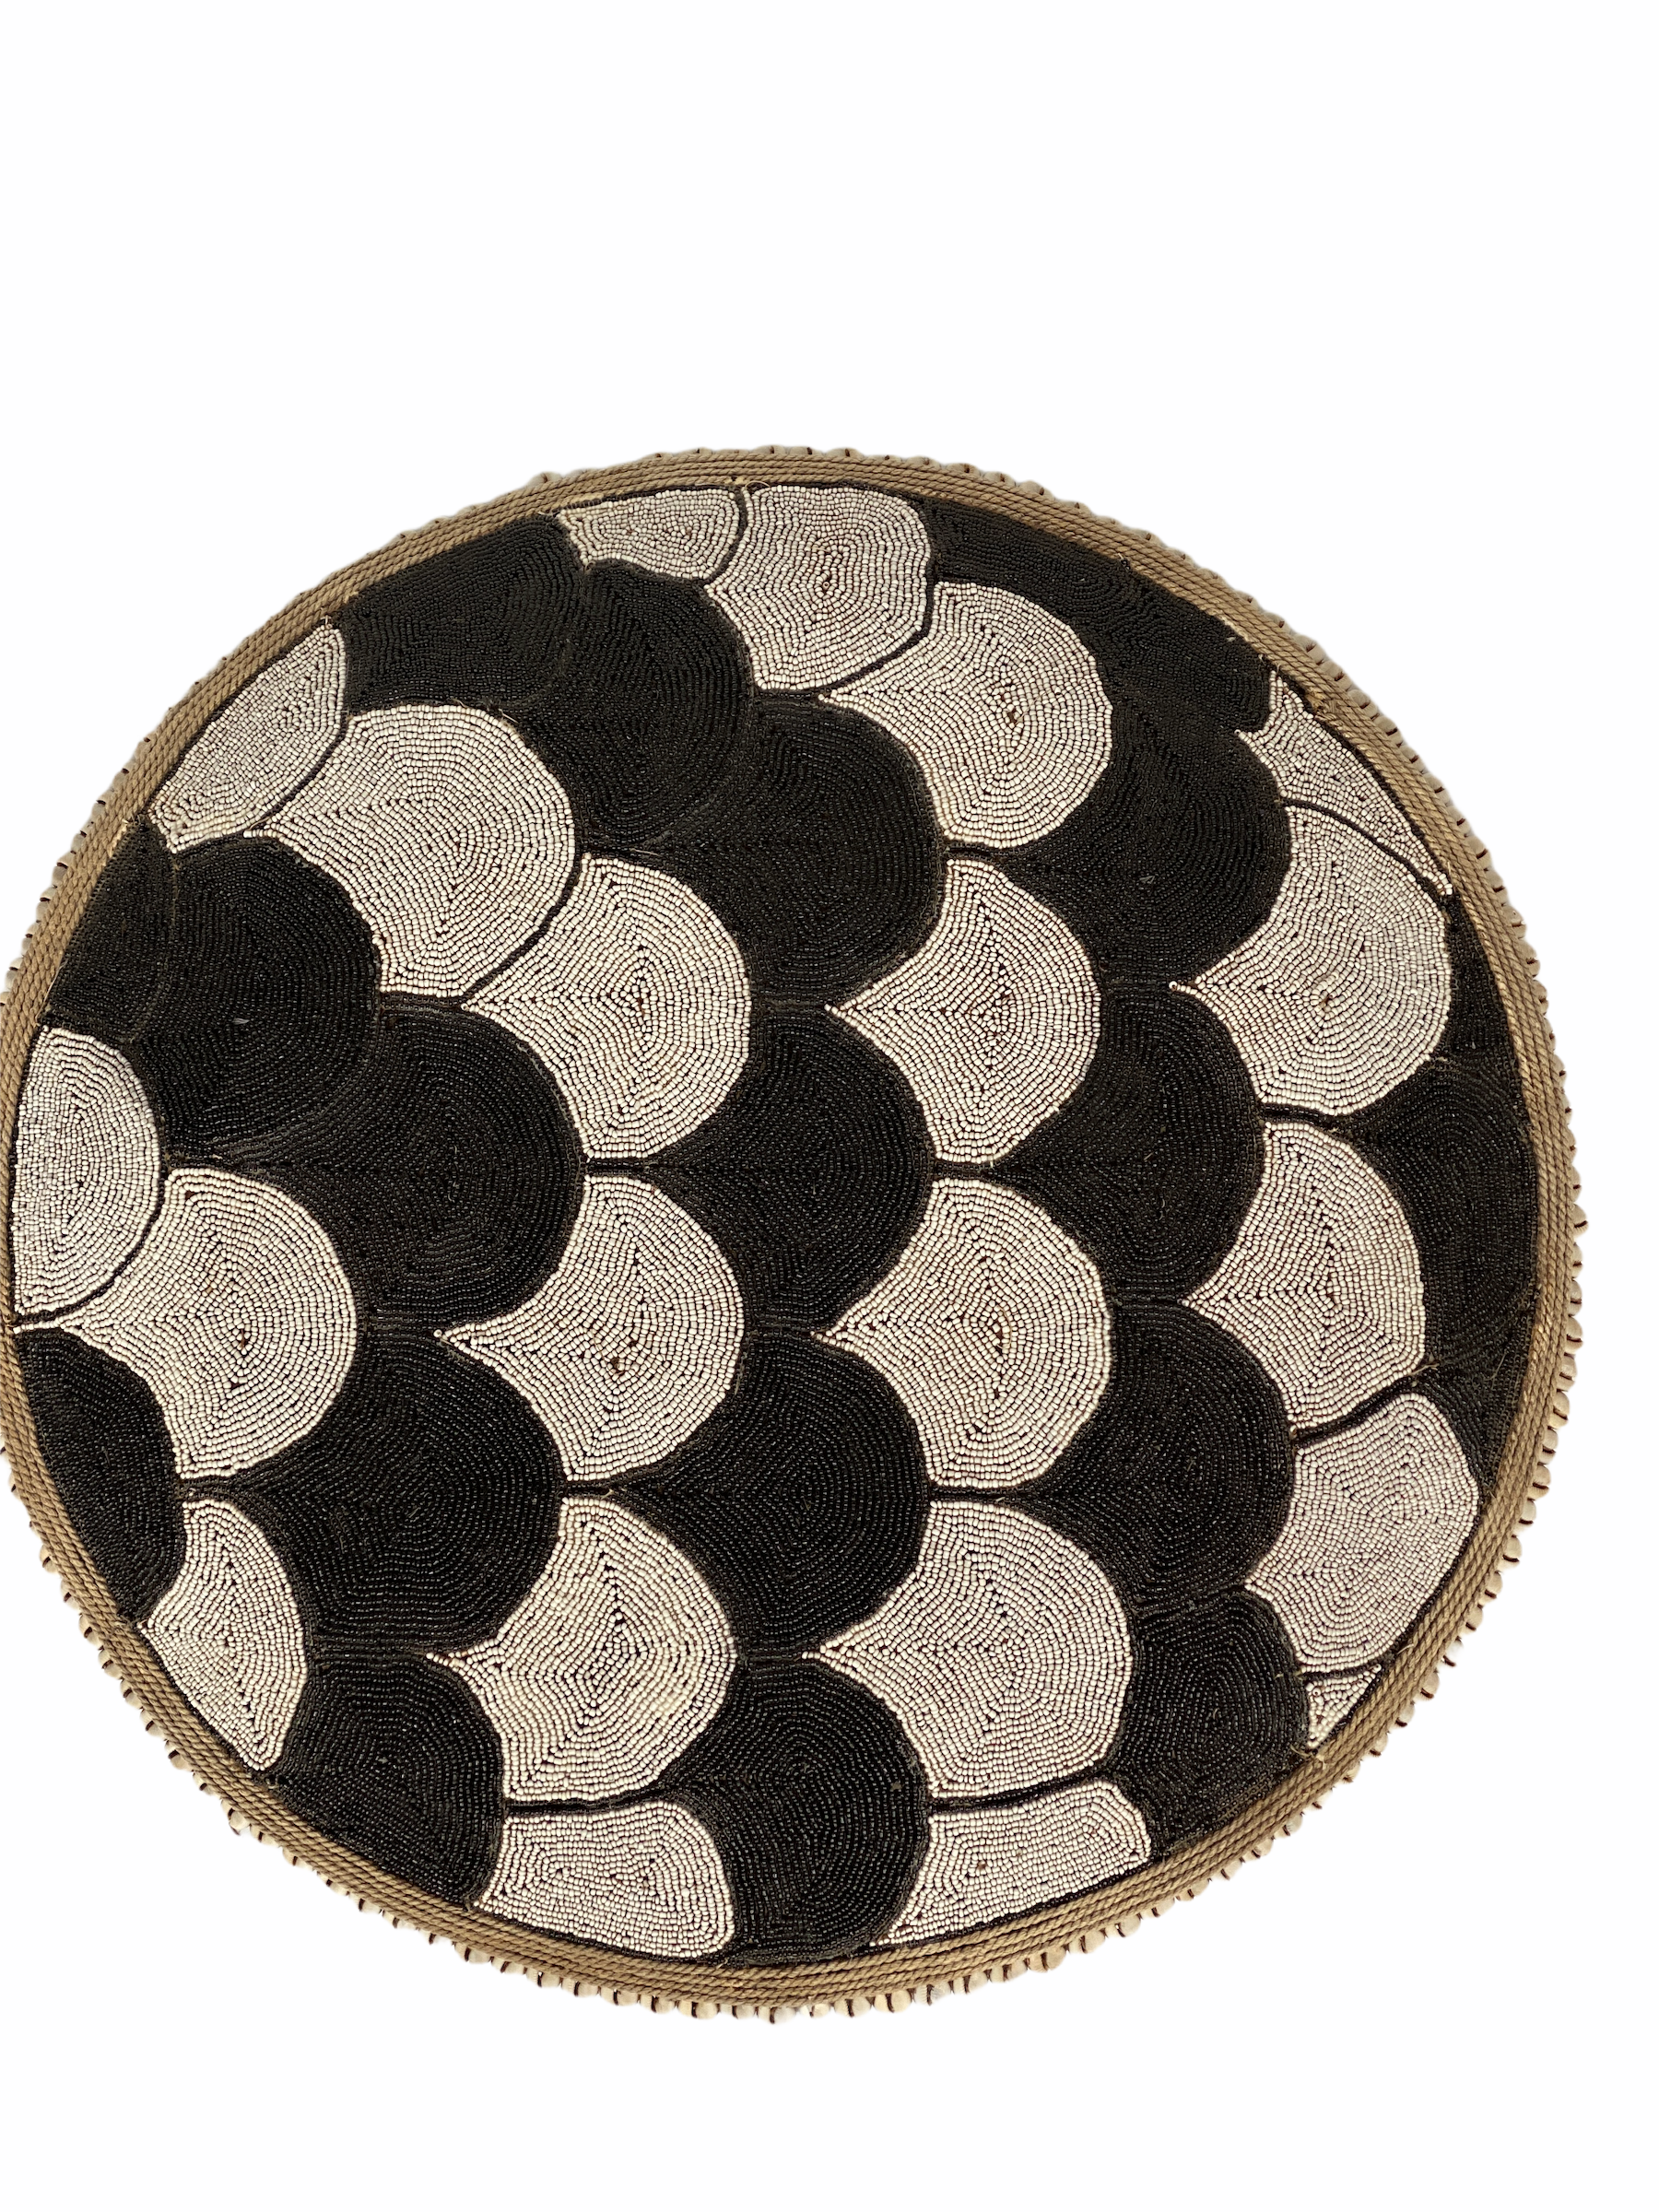 Cameroon Beaded Shield - L - 55cm black and white